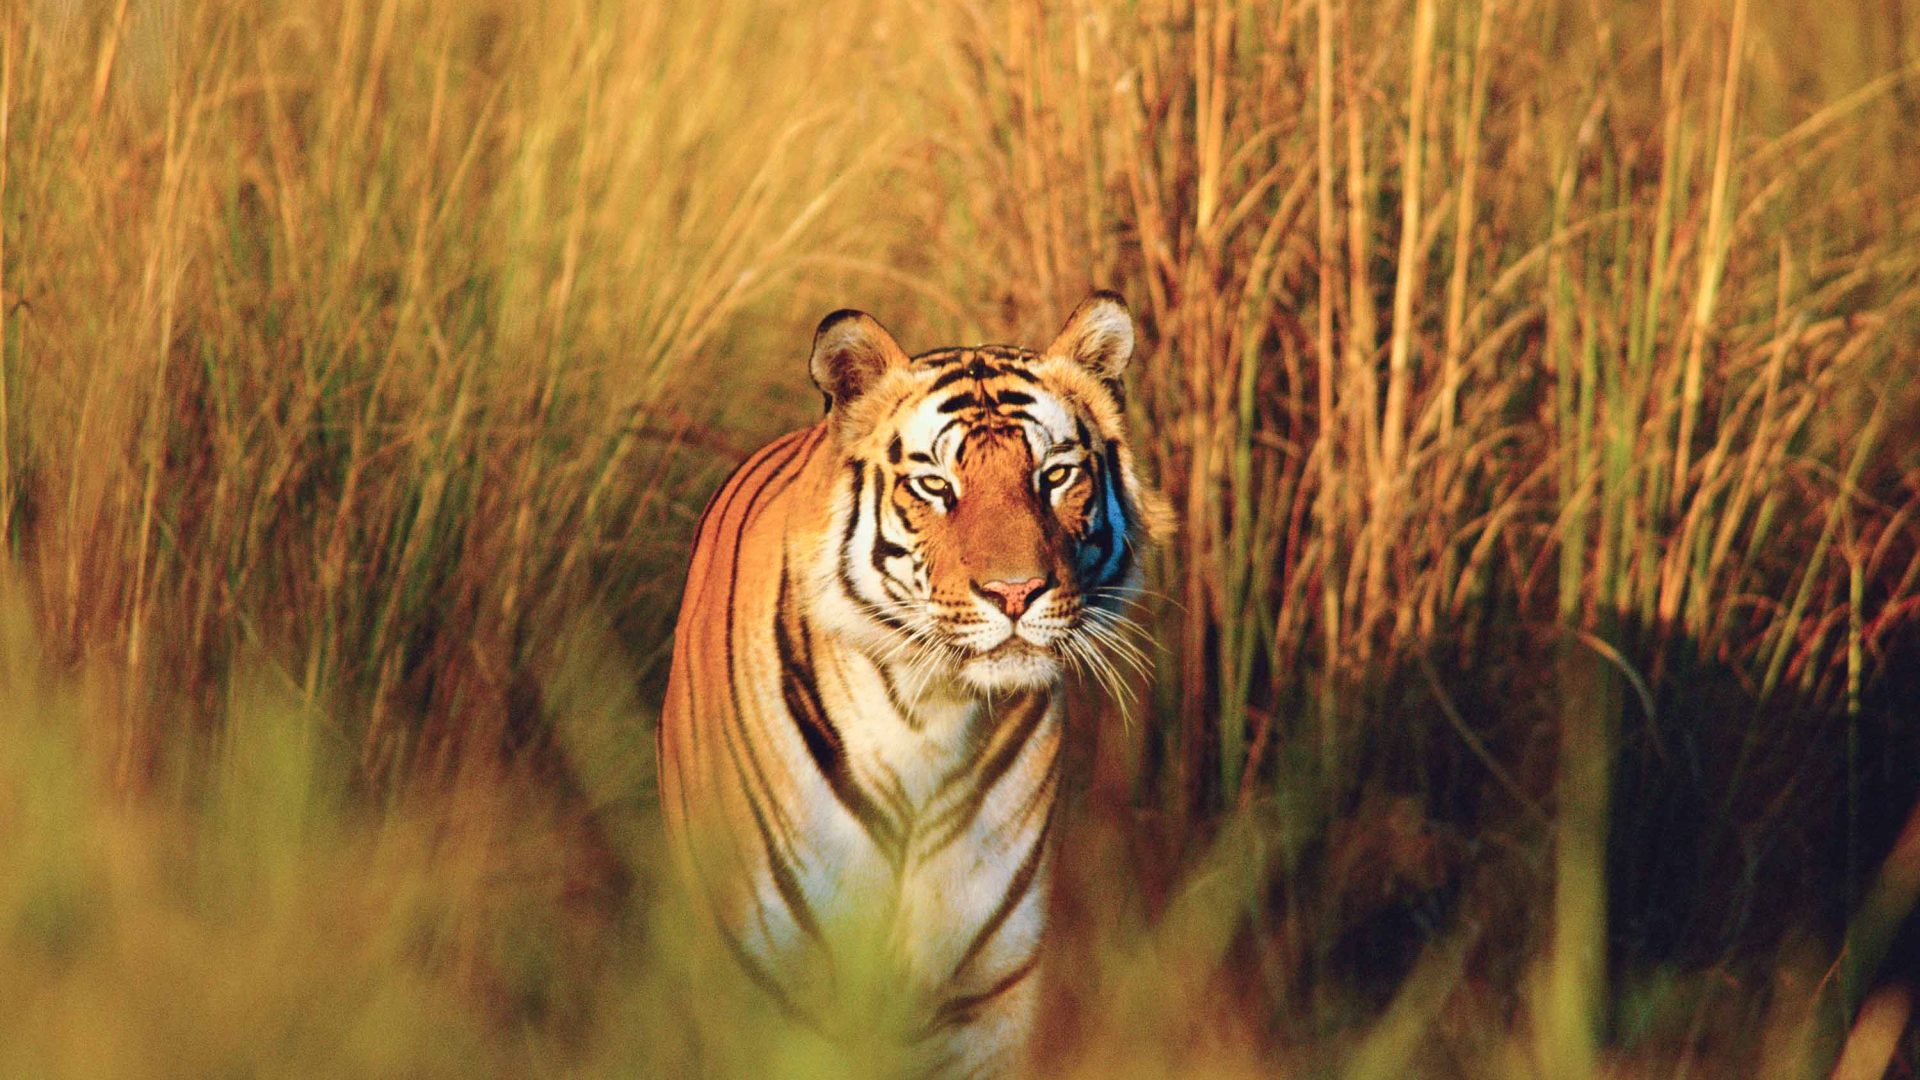 A tiger in long grass.